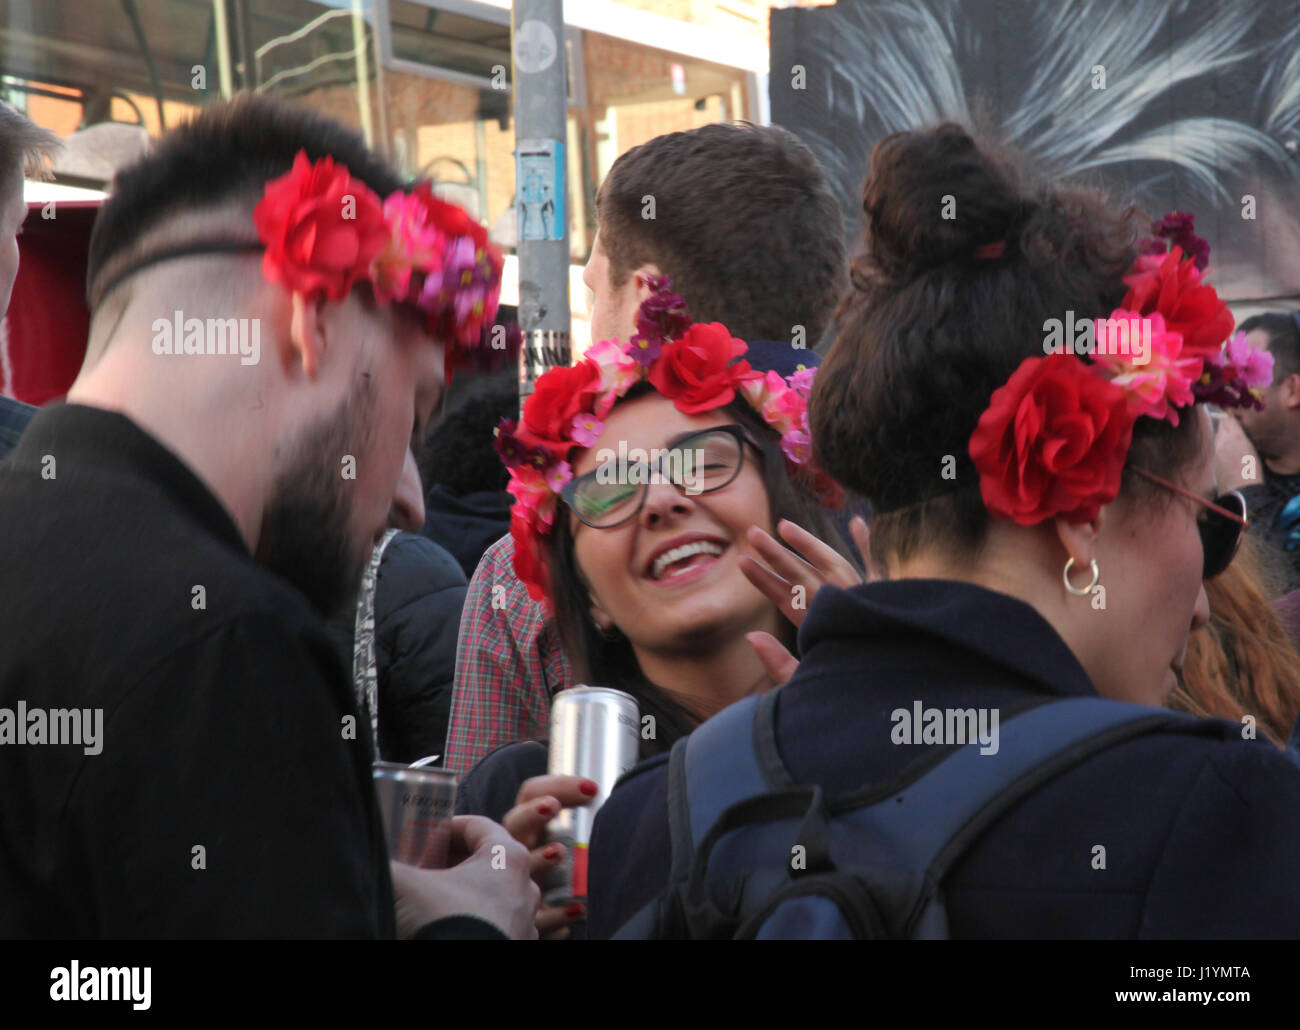 Manchester, UK. 22. April 2017. Store Tag, Manchester 22.04.17, Level Records pop-up Event, Credit: Gerard Noonan/Alamy Live News Stockfoto